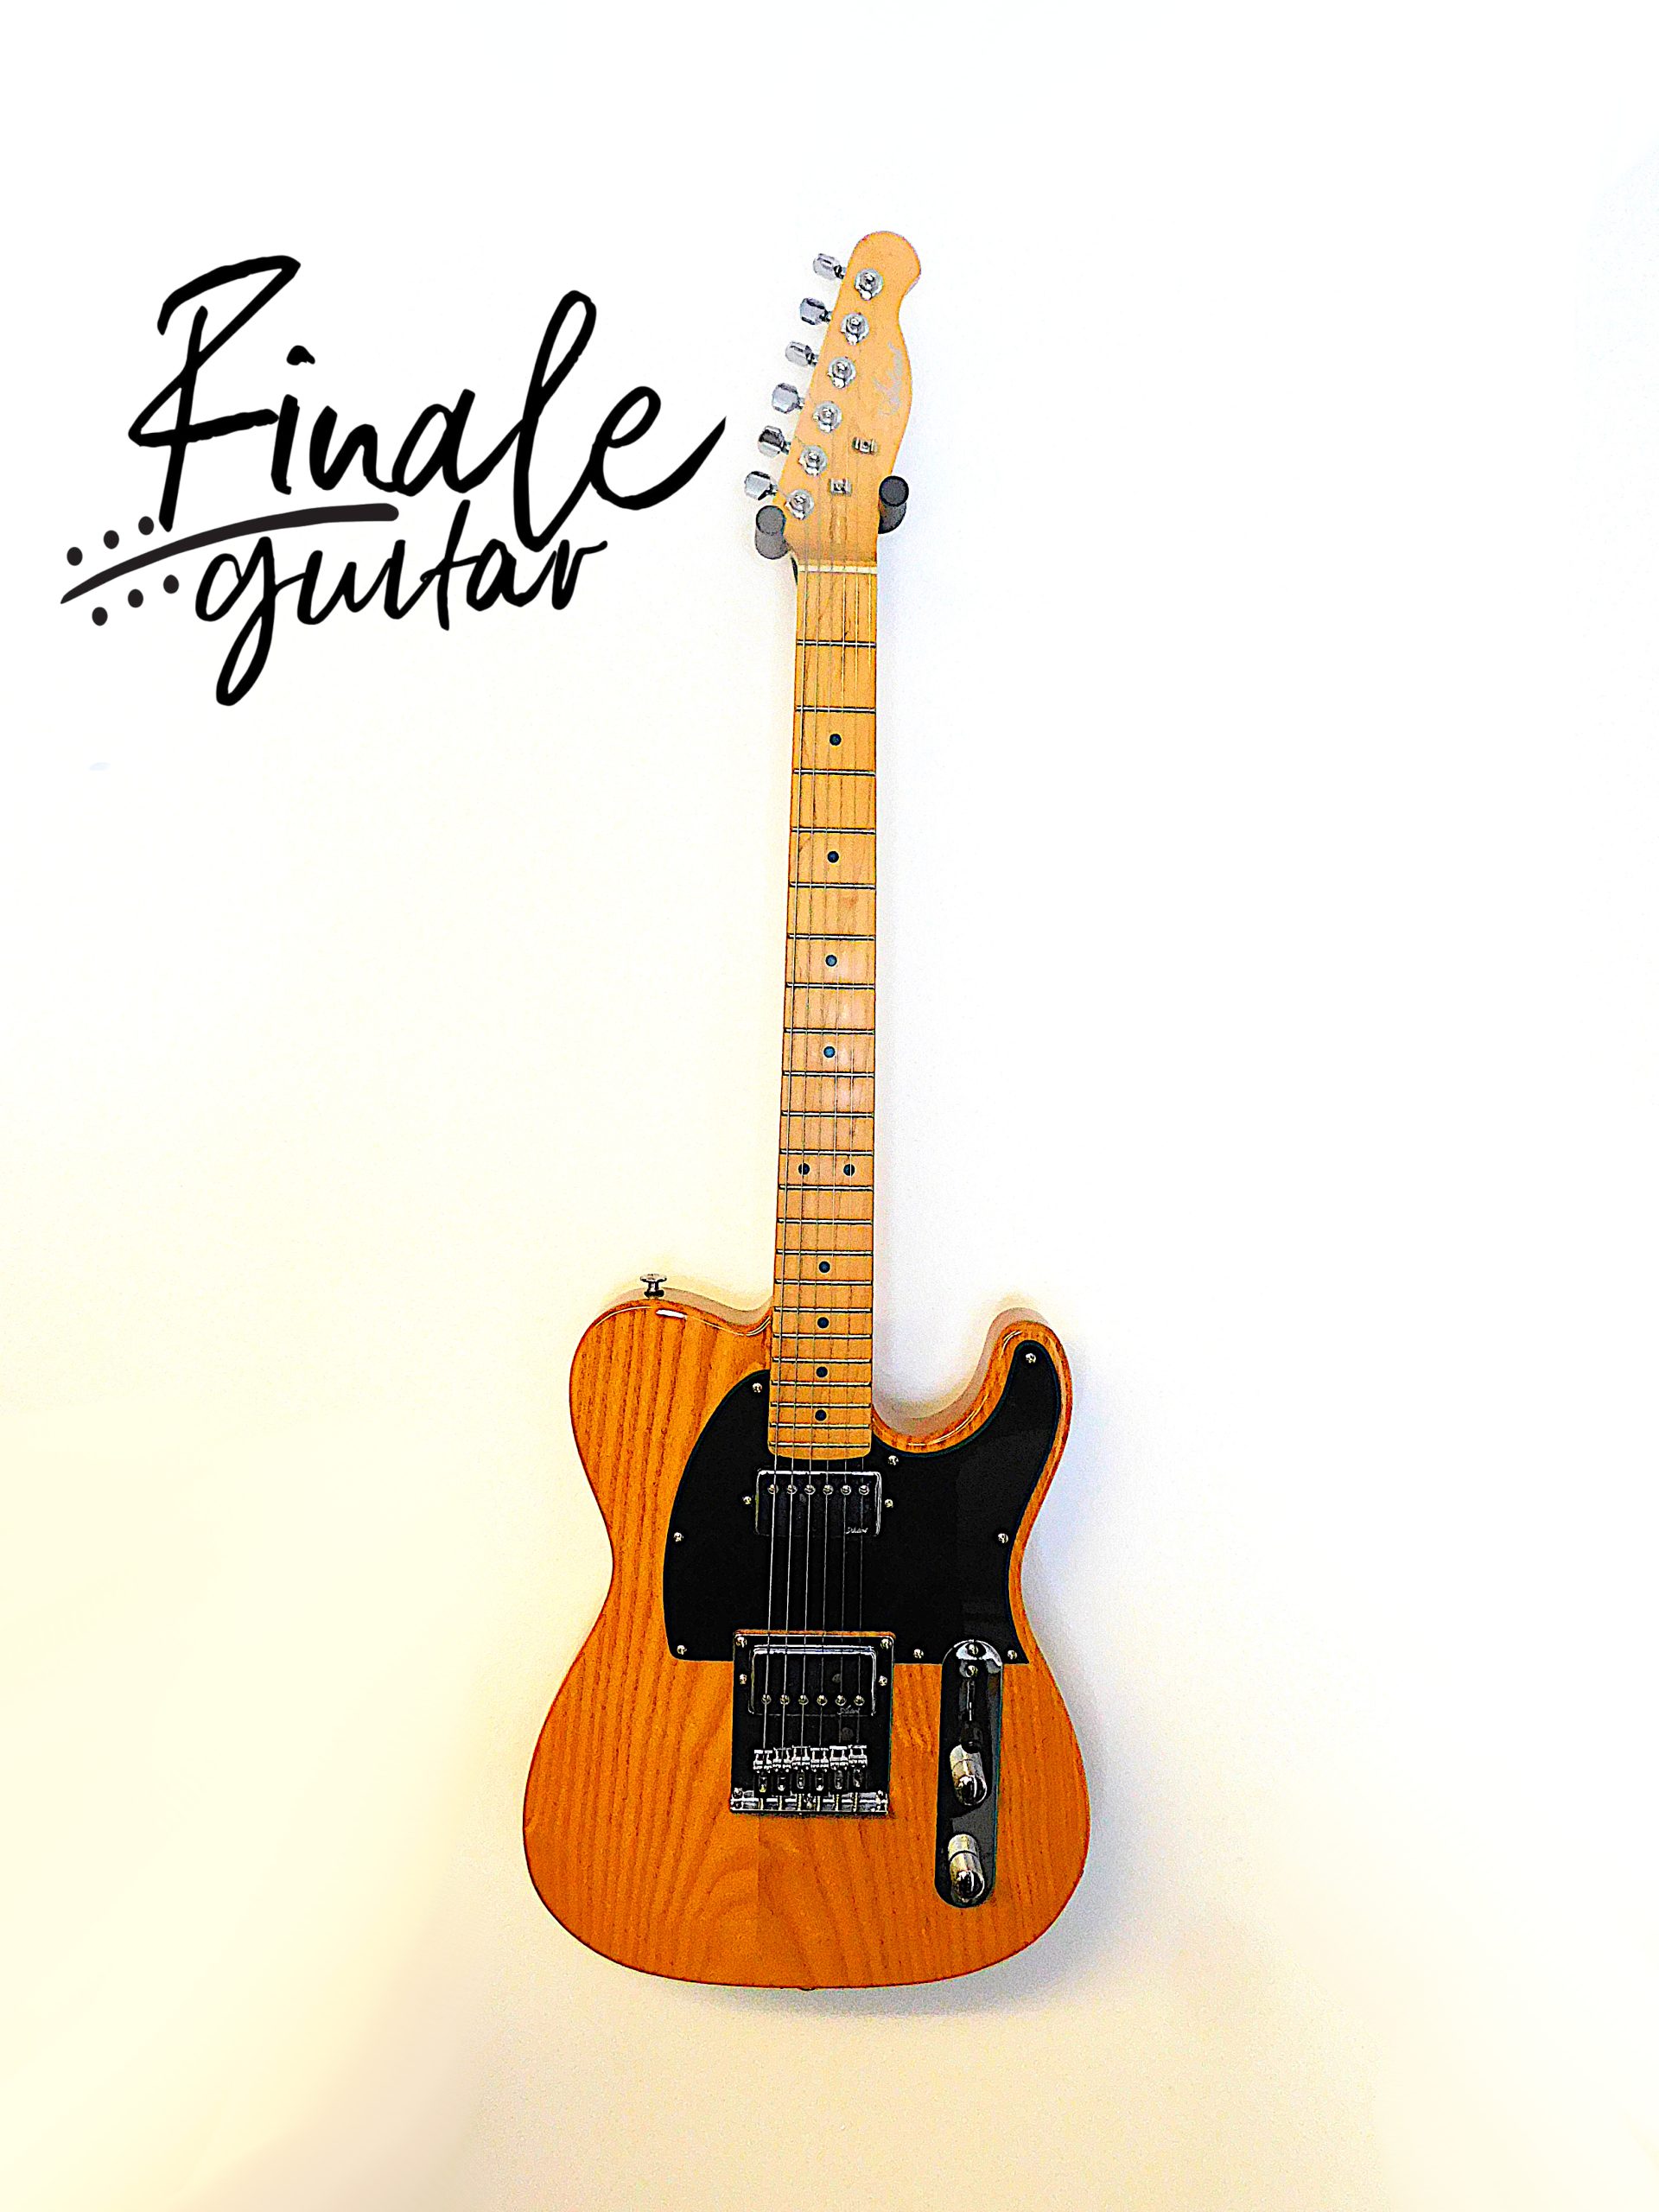 Artist Telecaster (natural finish) for sale in our Sheffield guitar shop, Finale Guitar